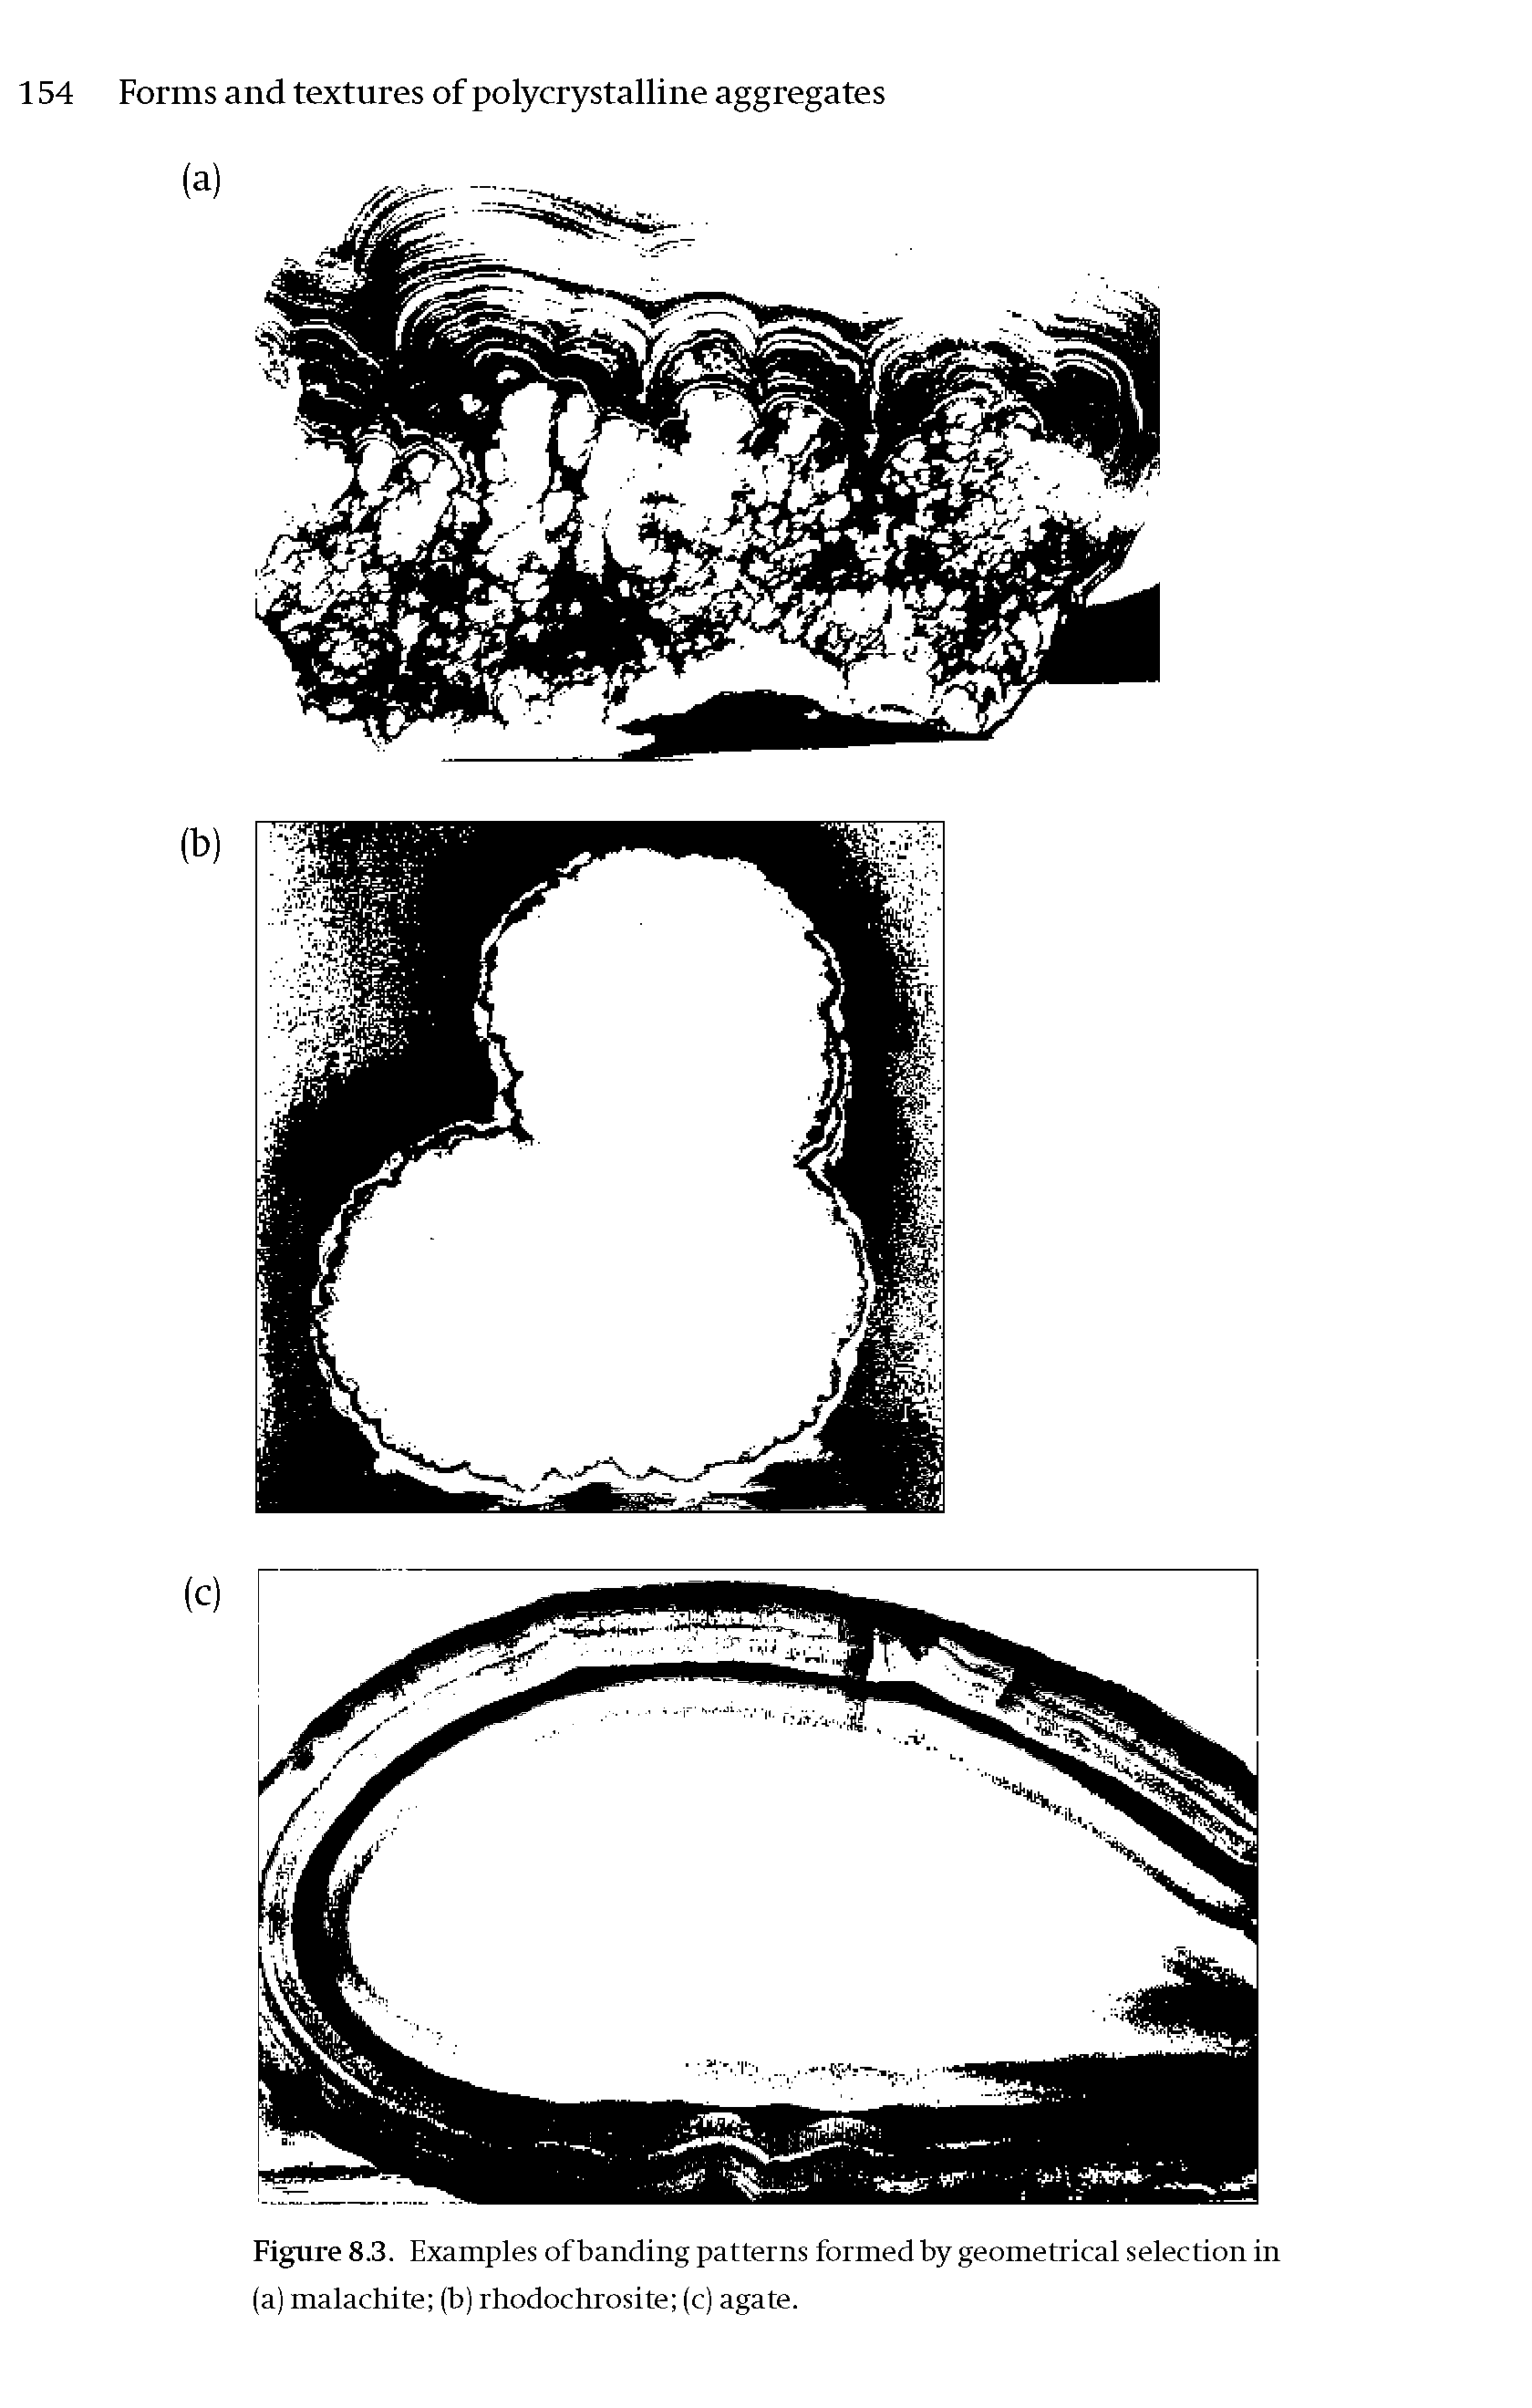 Figure 8.3. Examples of banding patterns formed by geometrical selection in (a) malachite (b) rhodochrosite (c) agate.